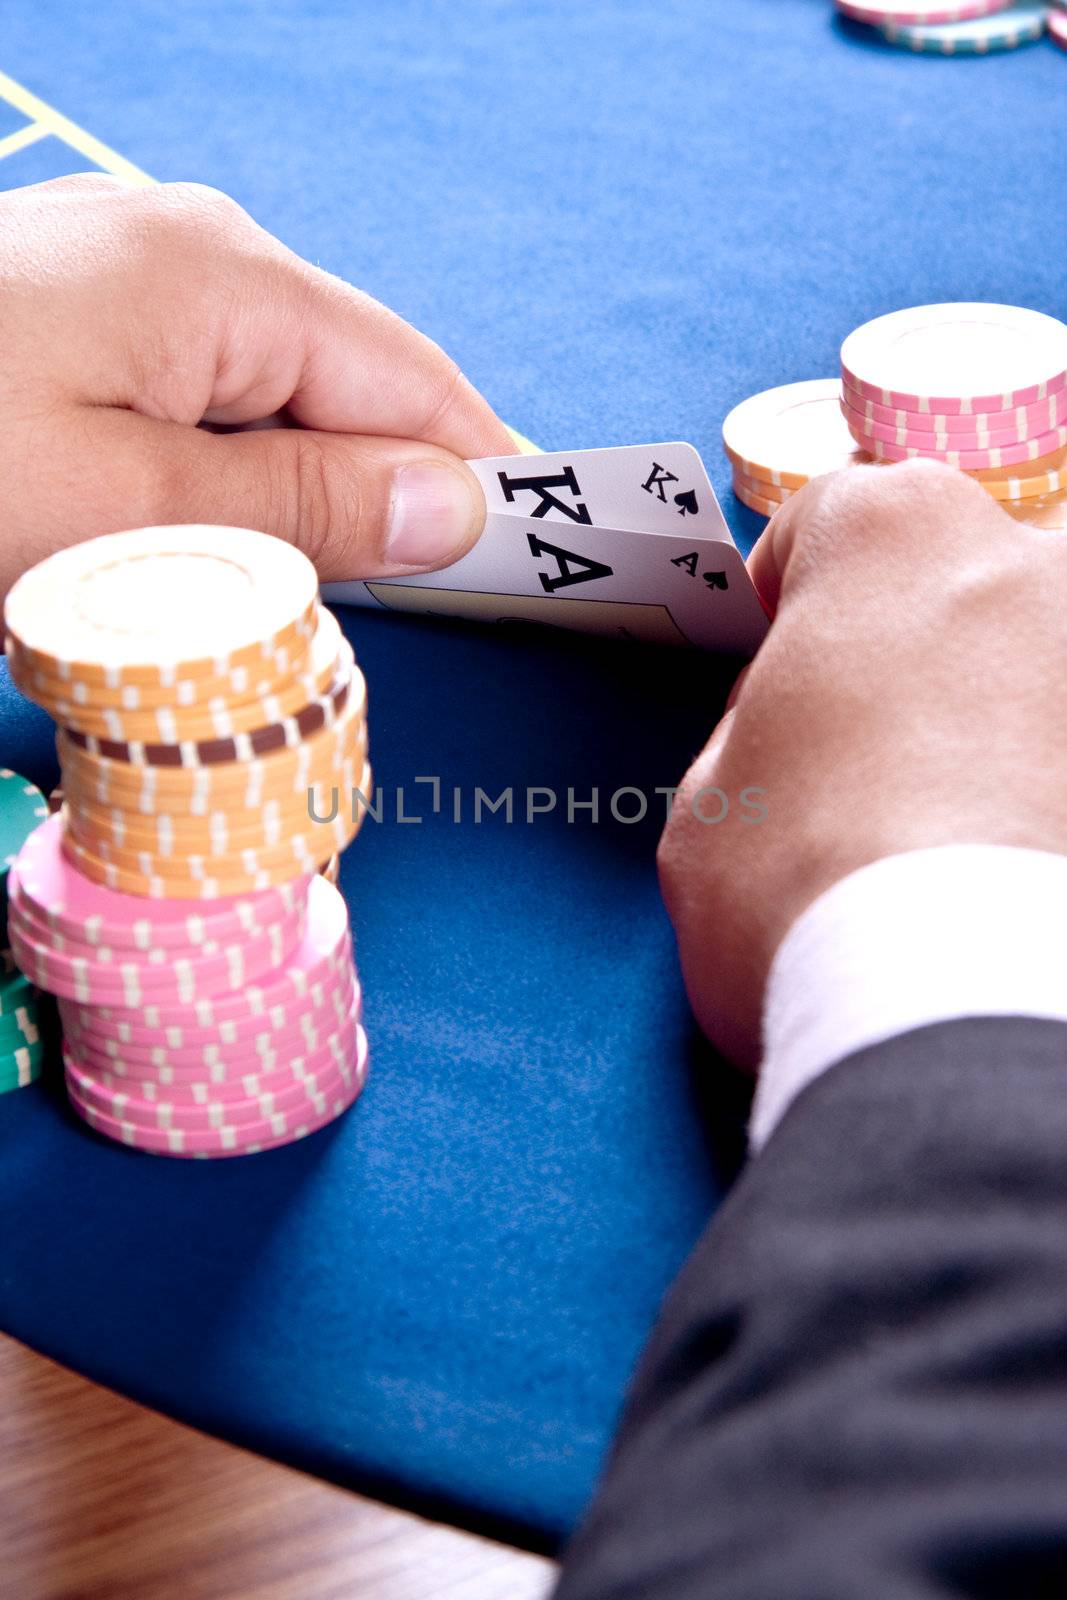 hands of a man with a card for the poker table